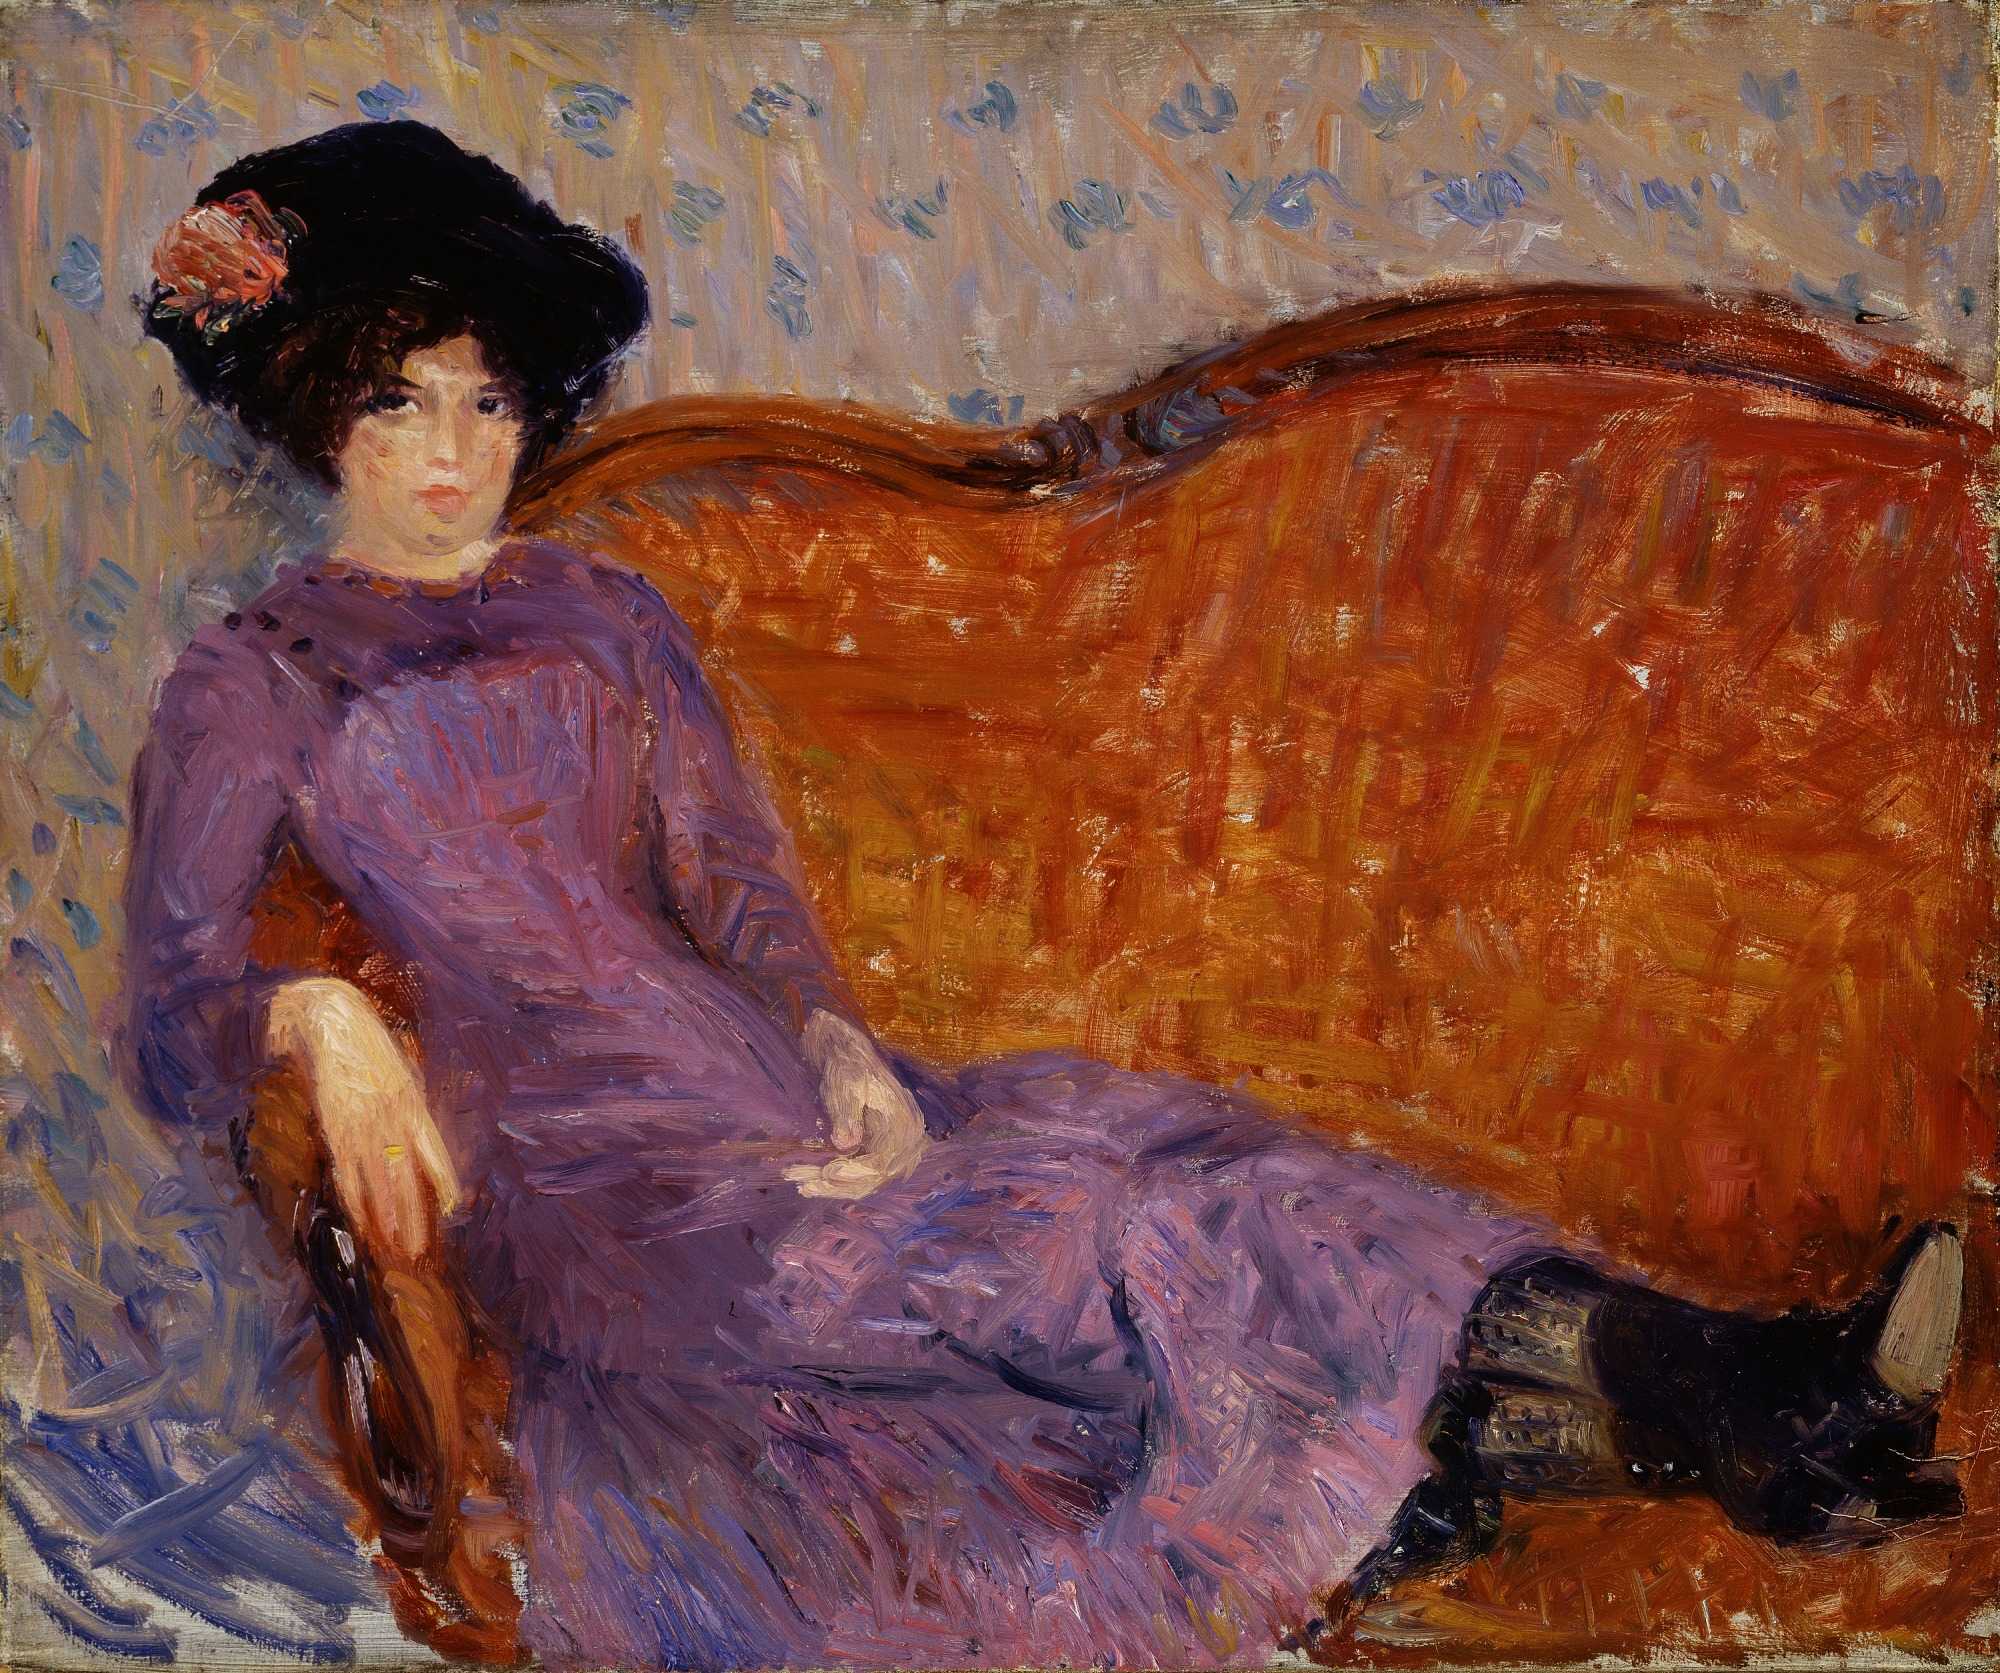 Find out more about William James Glackens - The Purple Dress